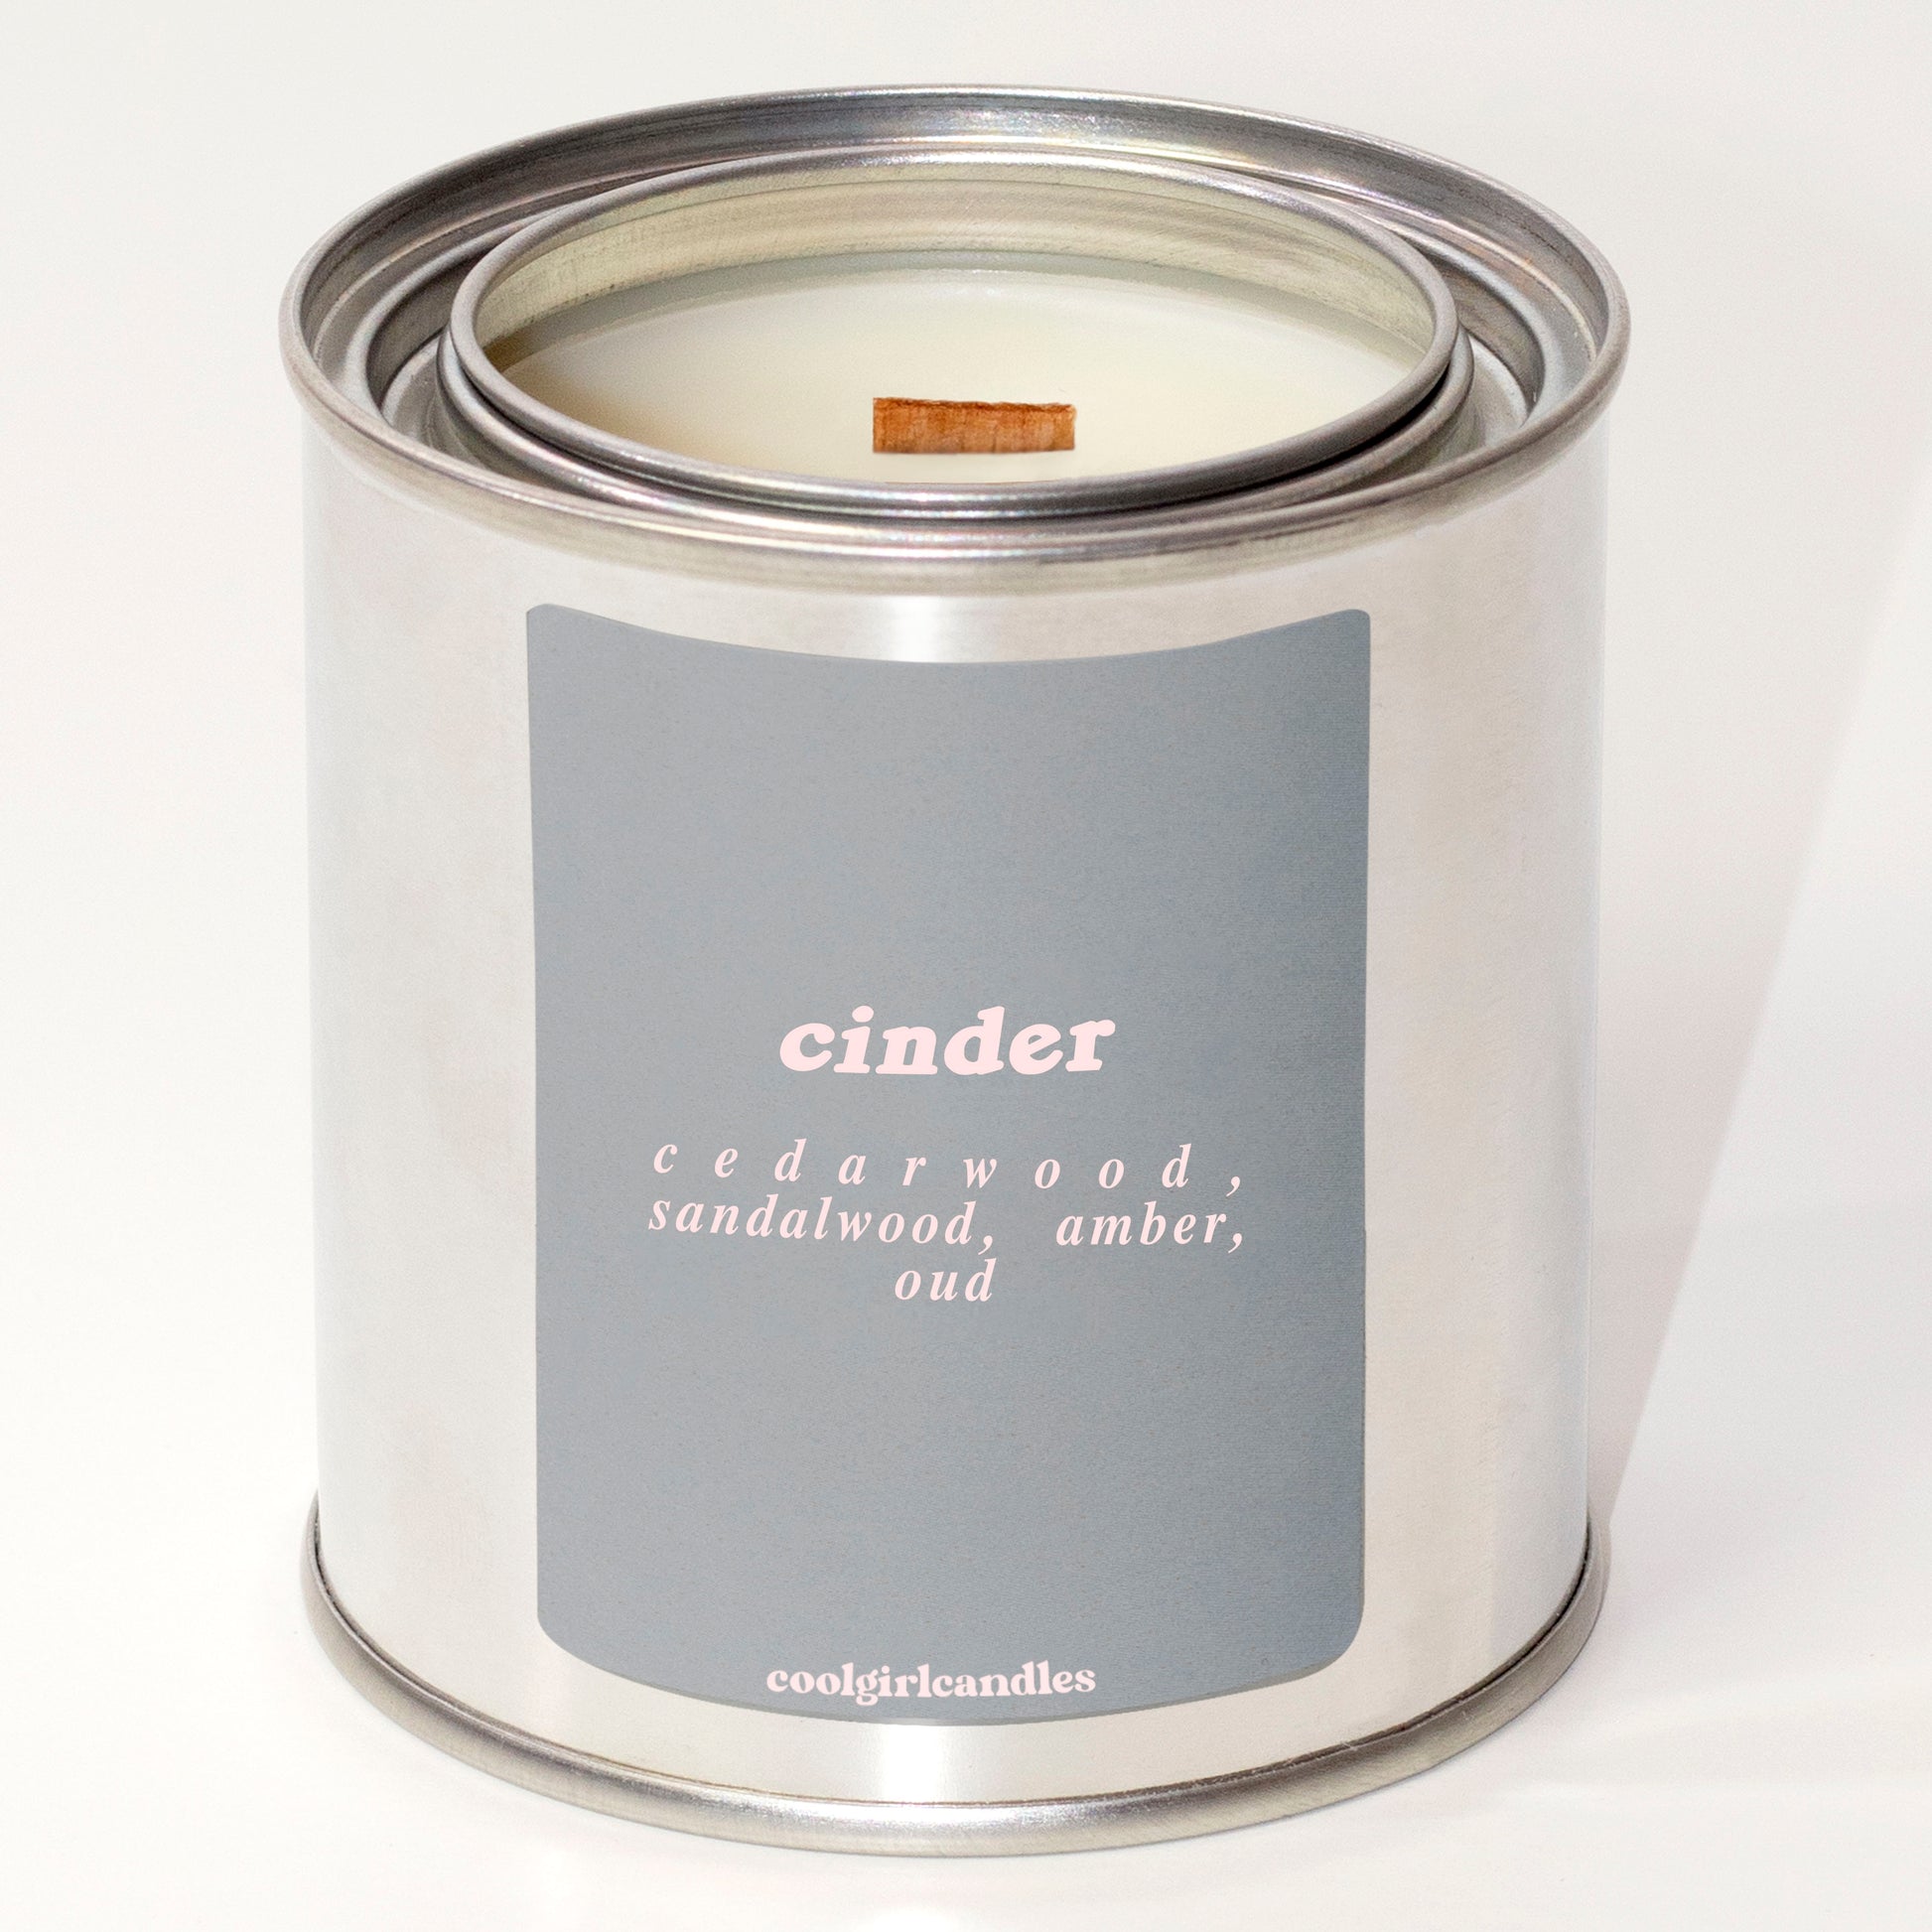 Cinder scented candle. A smoky, woody candle with notes of cedarwood, sandalwood, amber, and oud. Smoky oud candle. Fall candle 2022